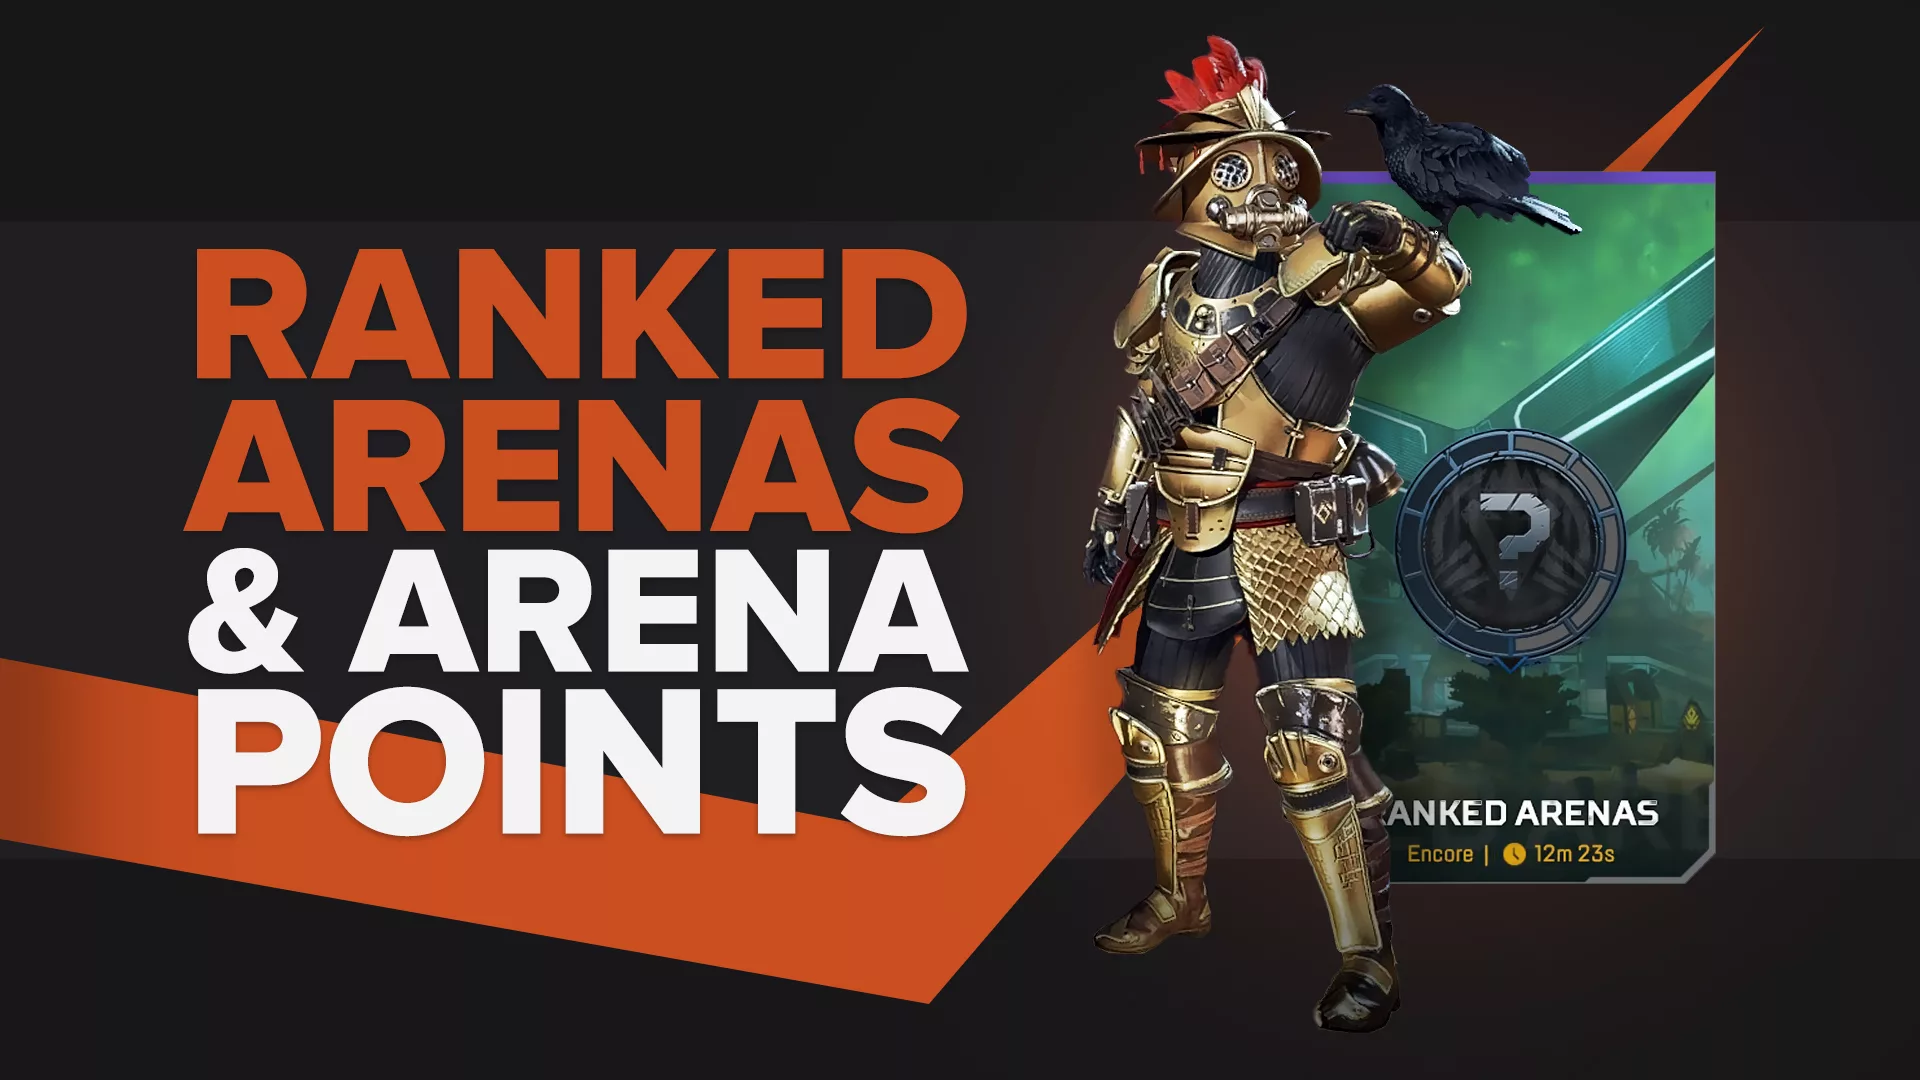 Get familiar with the Ranked Arenas and AP in Apex Legends!